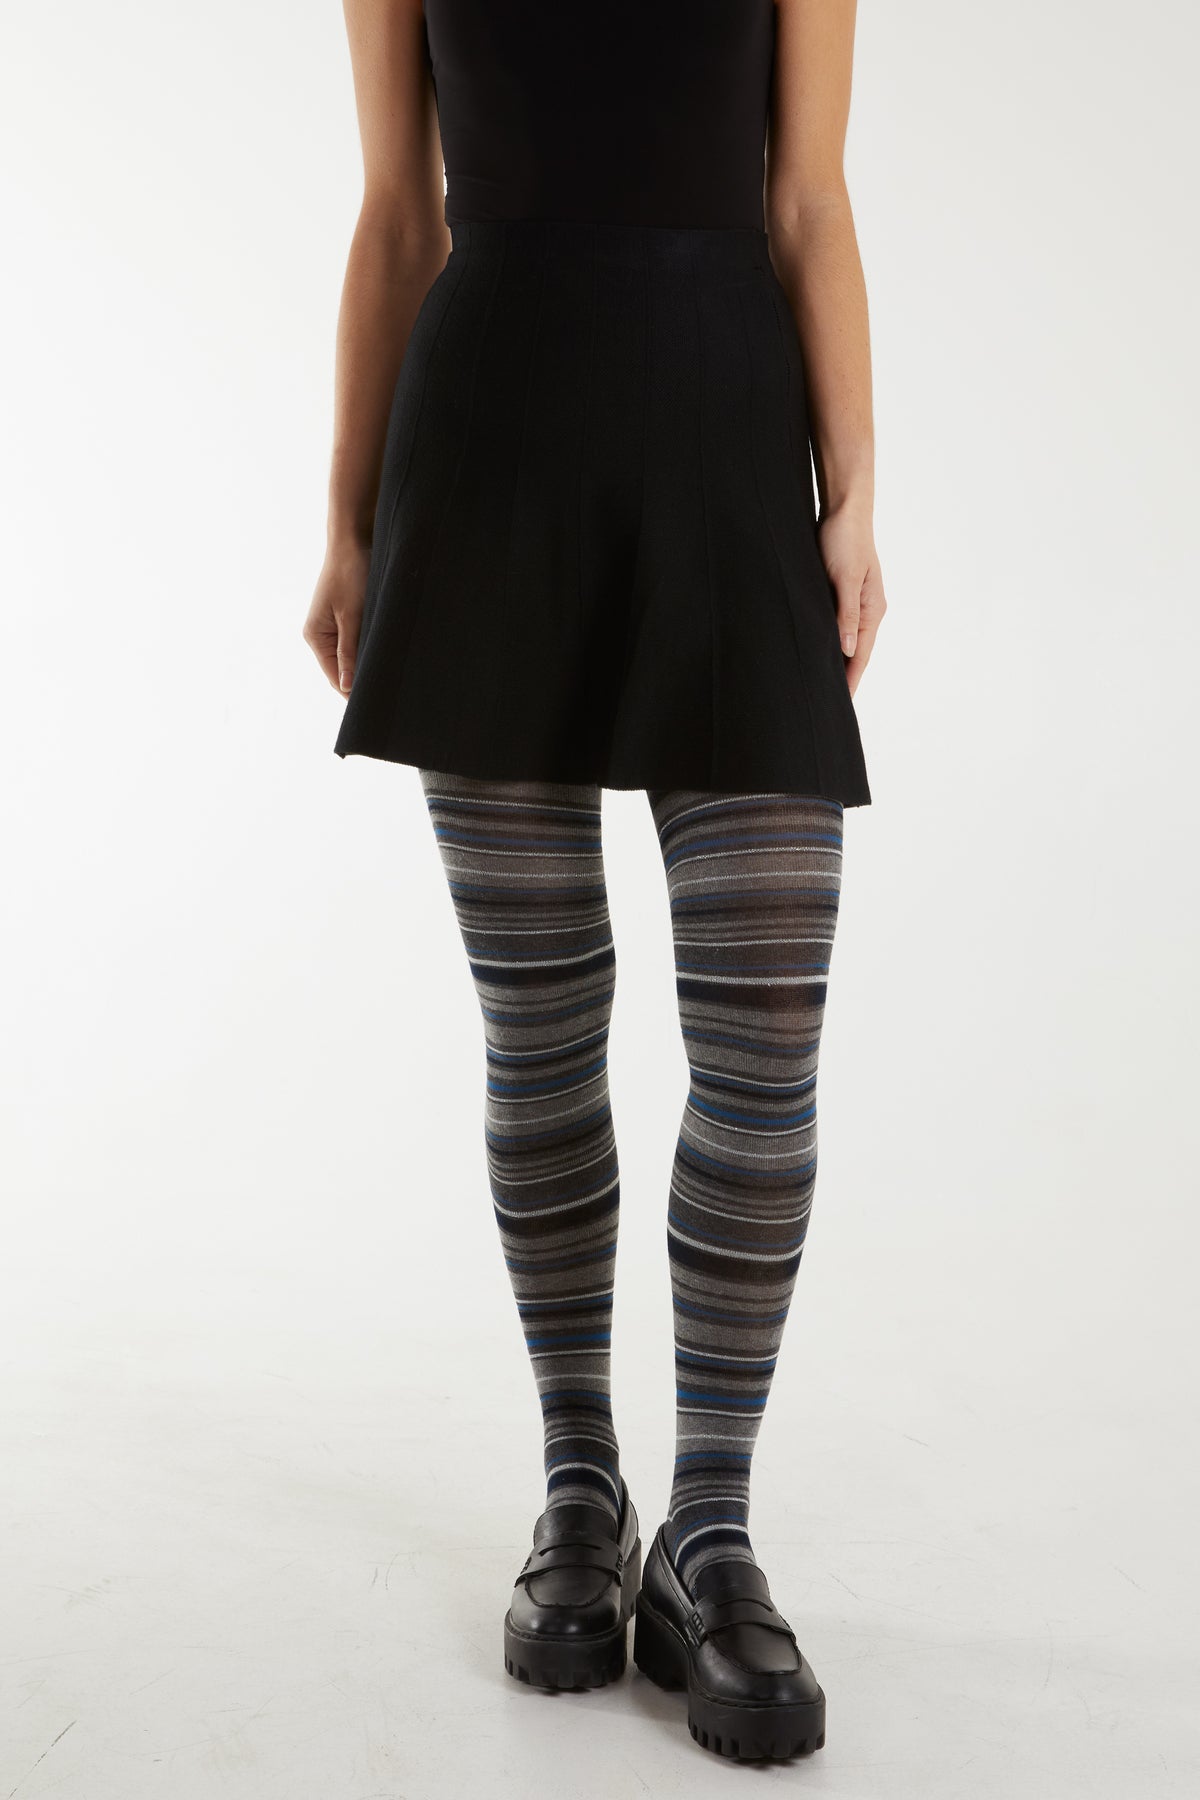 Multipack Striped Tights